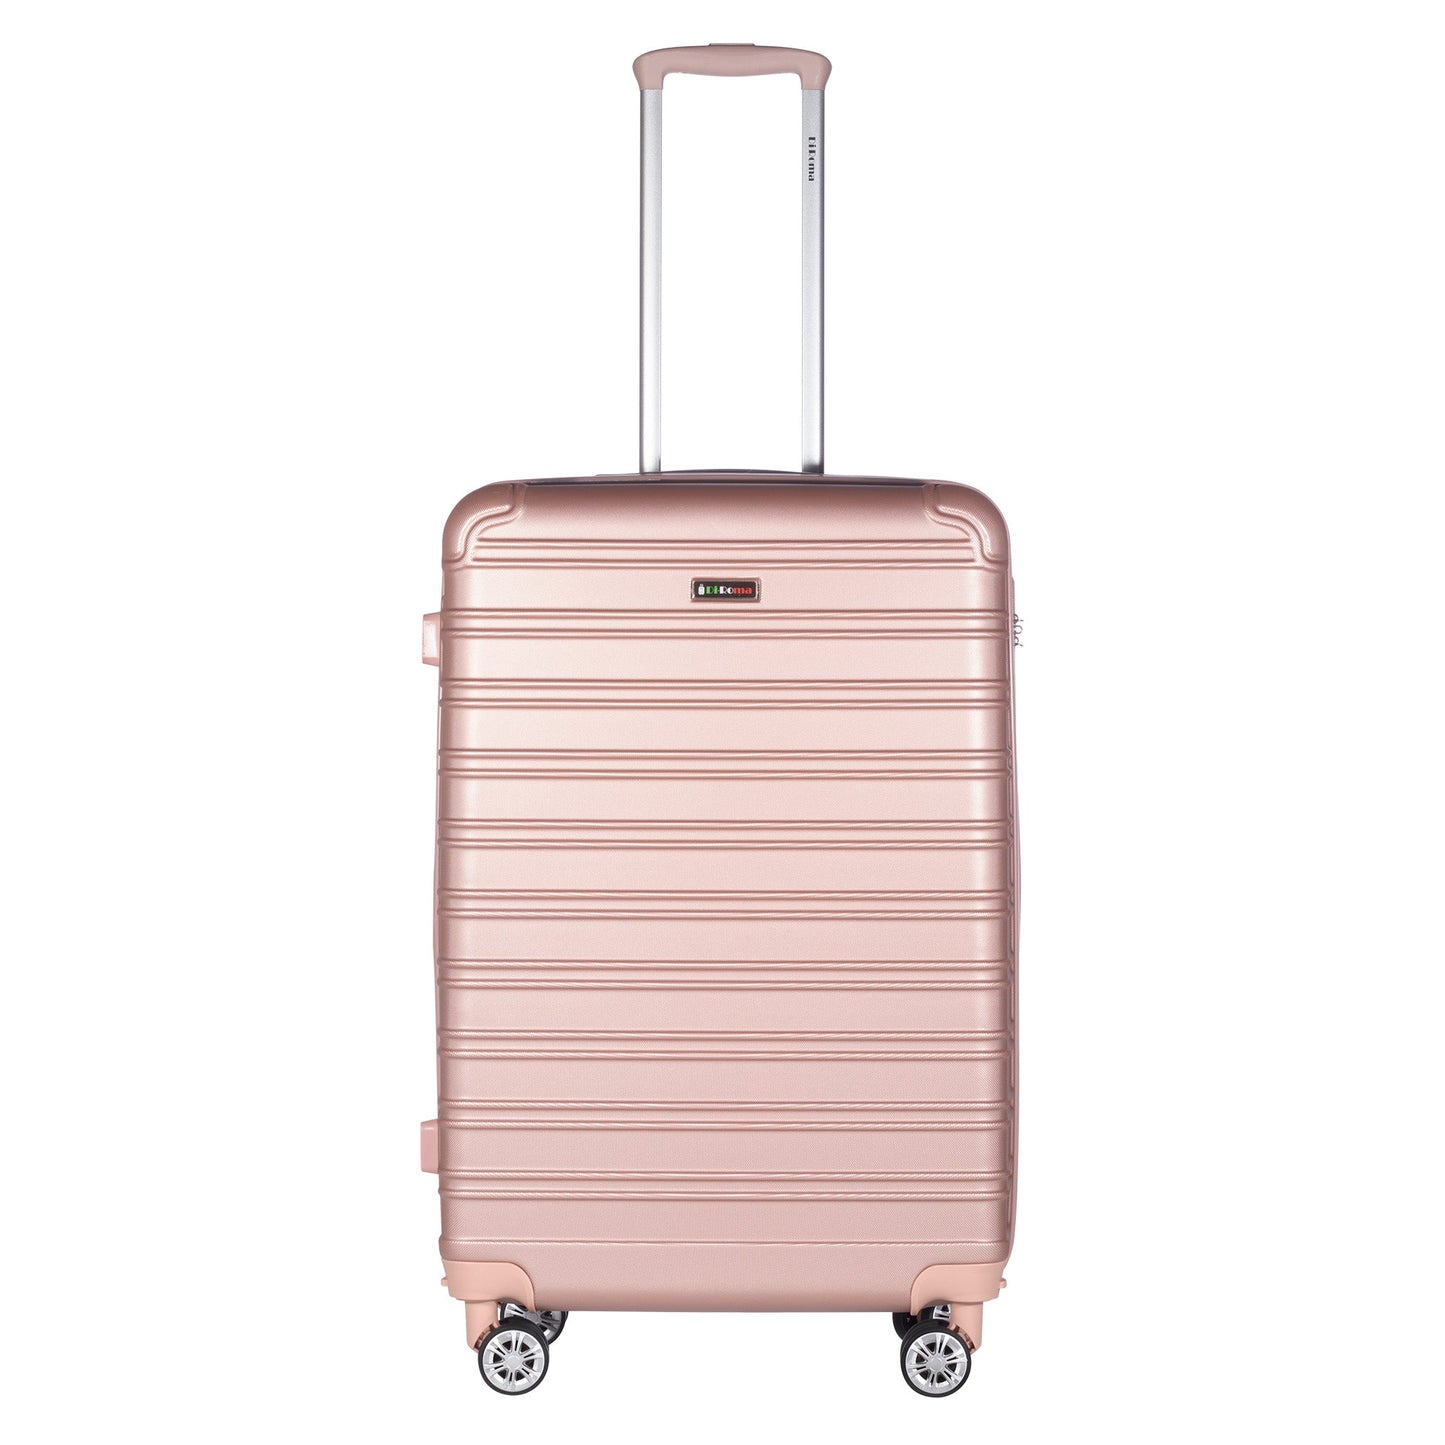 King Collection Rose Gold luggage (20/26/28/30") Suitcase Lock Spinner Hard